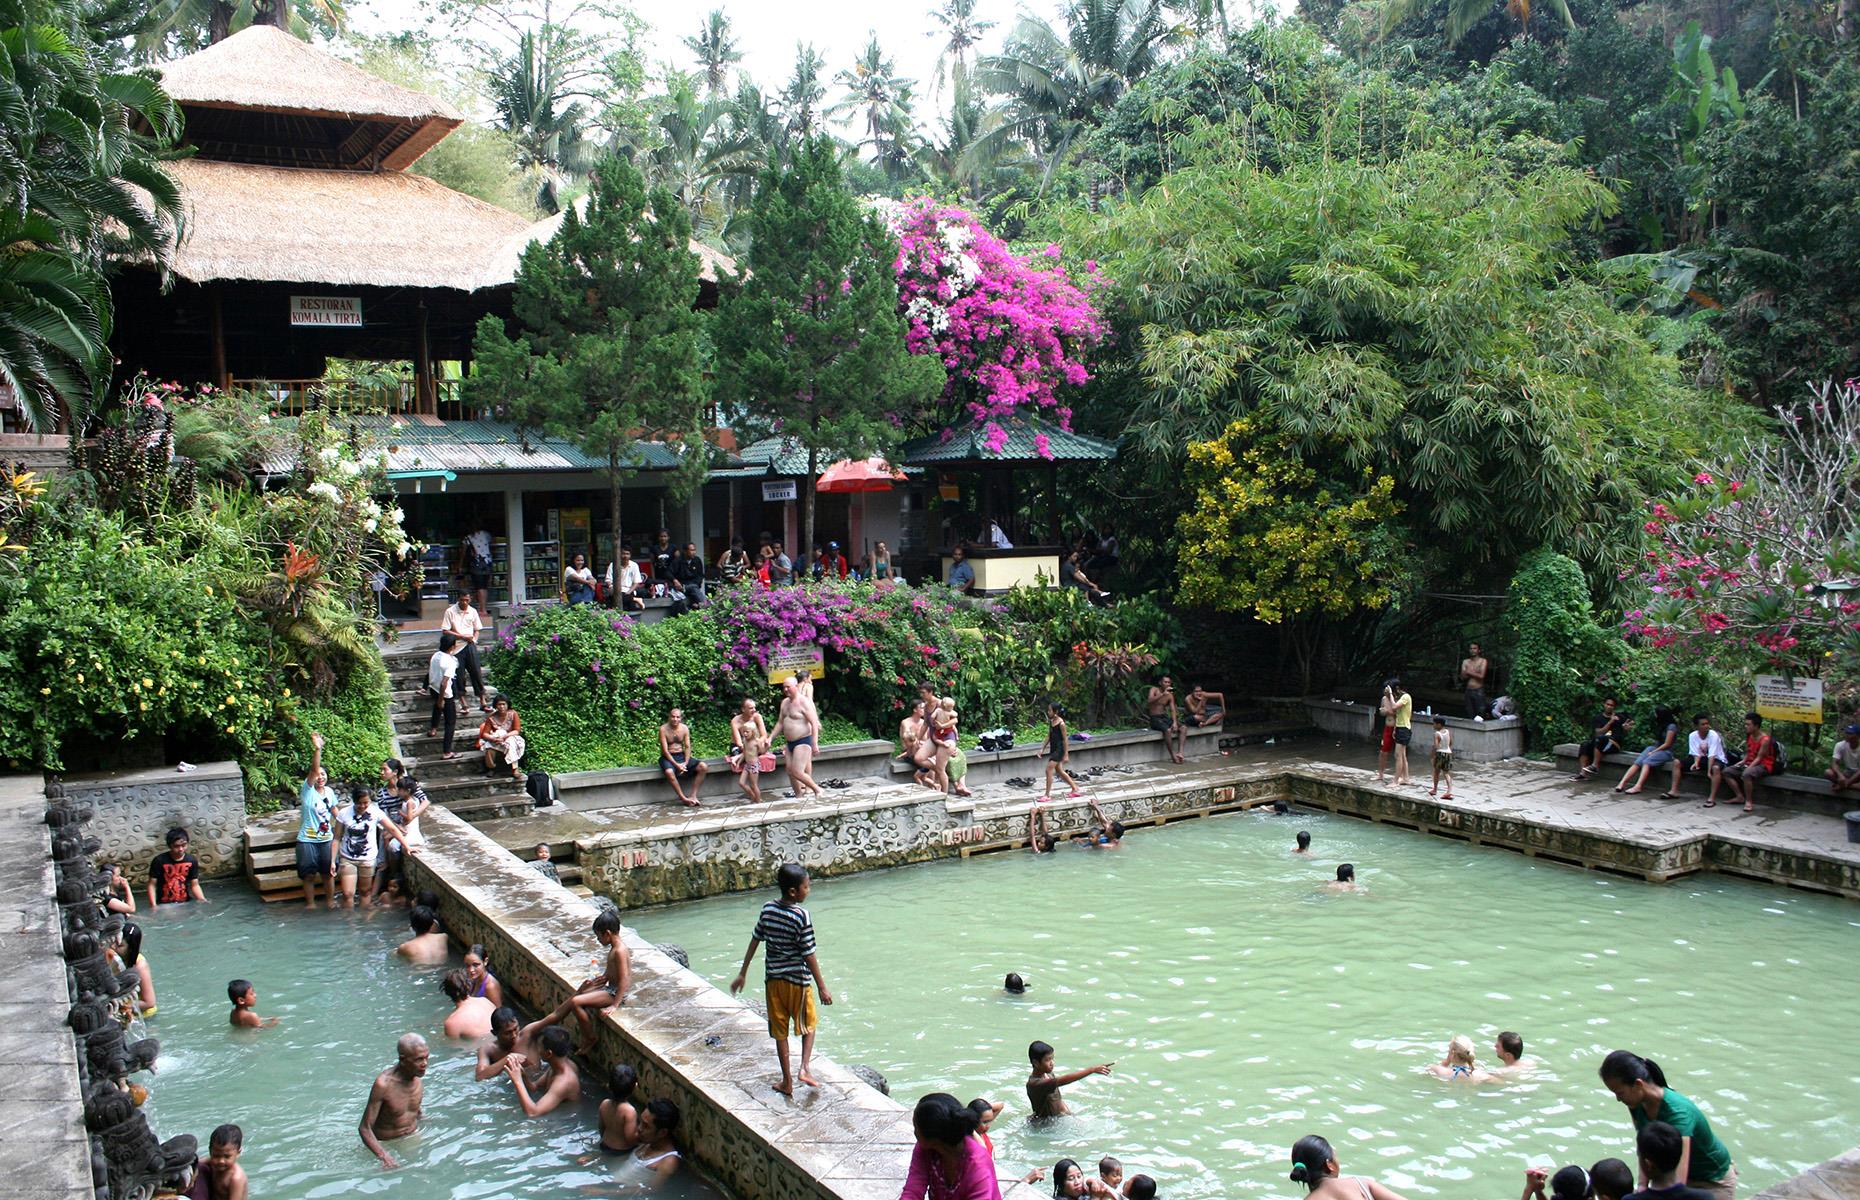 <p>With temperatures up to 100°F and a 26% sulfur content to help soothe irritated skin, the Banjar Hot Springs of Bali, Indonesia are famed for their healing waters. The springs are located in the northern reaches of the island, near the Brahma Vihara Arama Buddhist monastery, and offer three different pools: a main swimming pool, one for children, and one where the silky green spring water spouts from a row of dragon heads.</p>